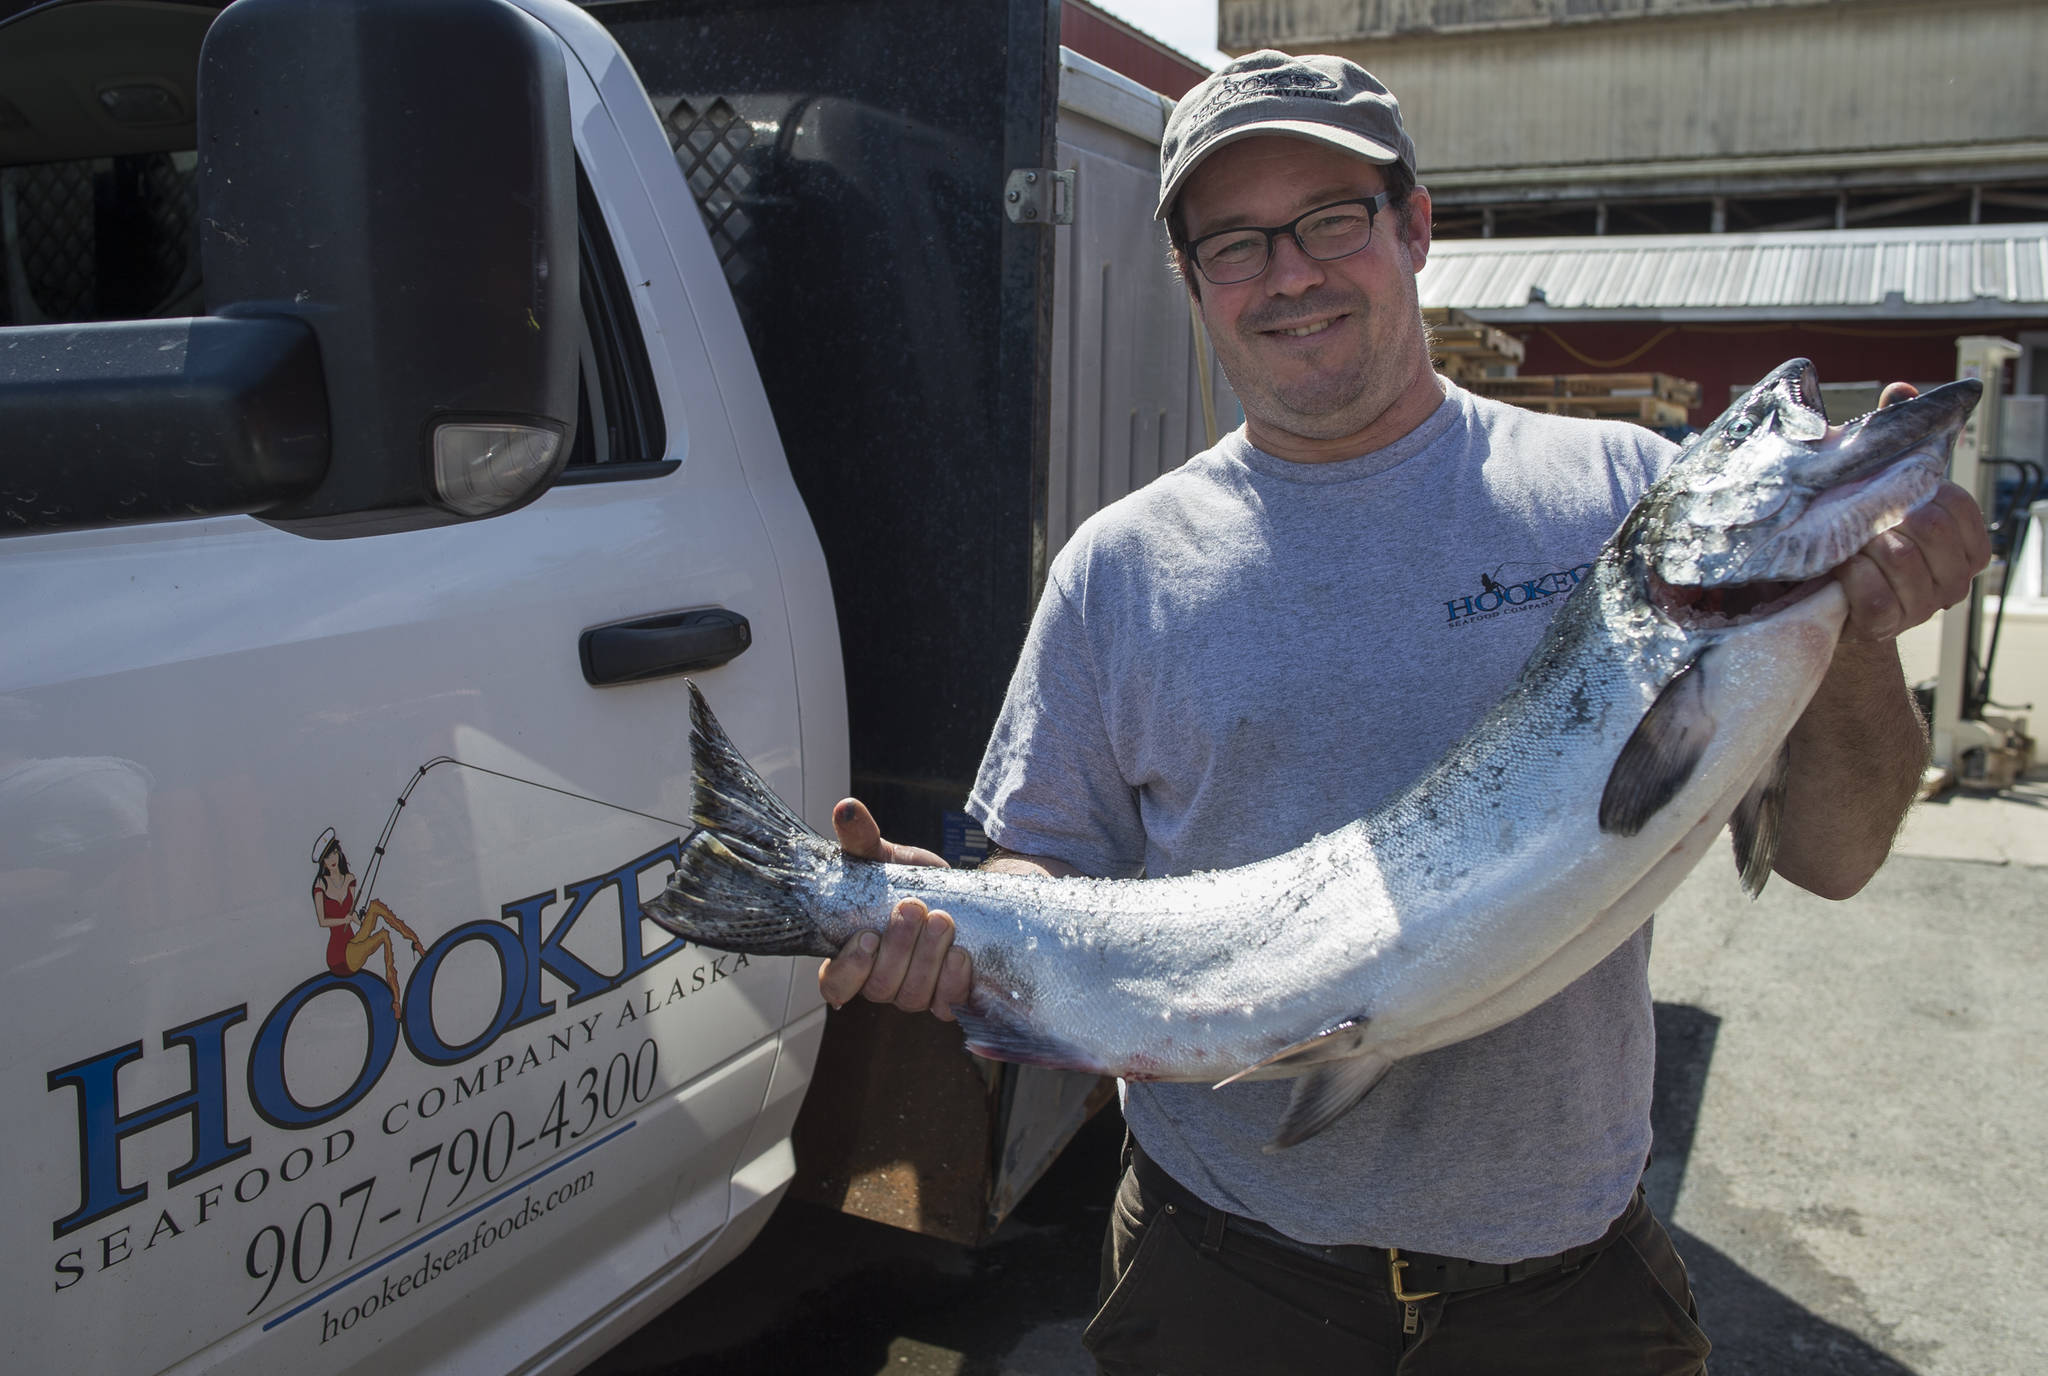 Brad Robbins, the new owner of the Hooked Seafood Company, holds a fresh king salmon at their Industrial Boulevard location on Tuesday, June 19, 2018. (Michael Penn | Juneau Empire)